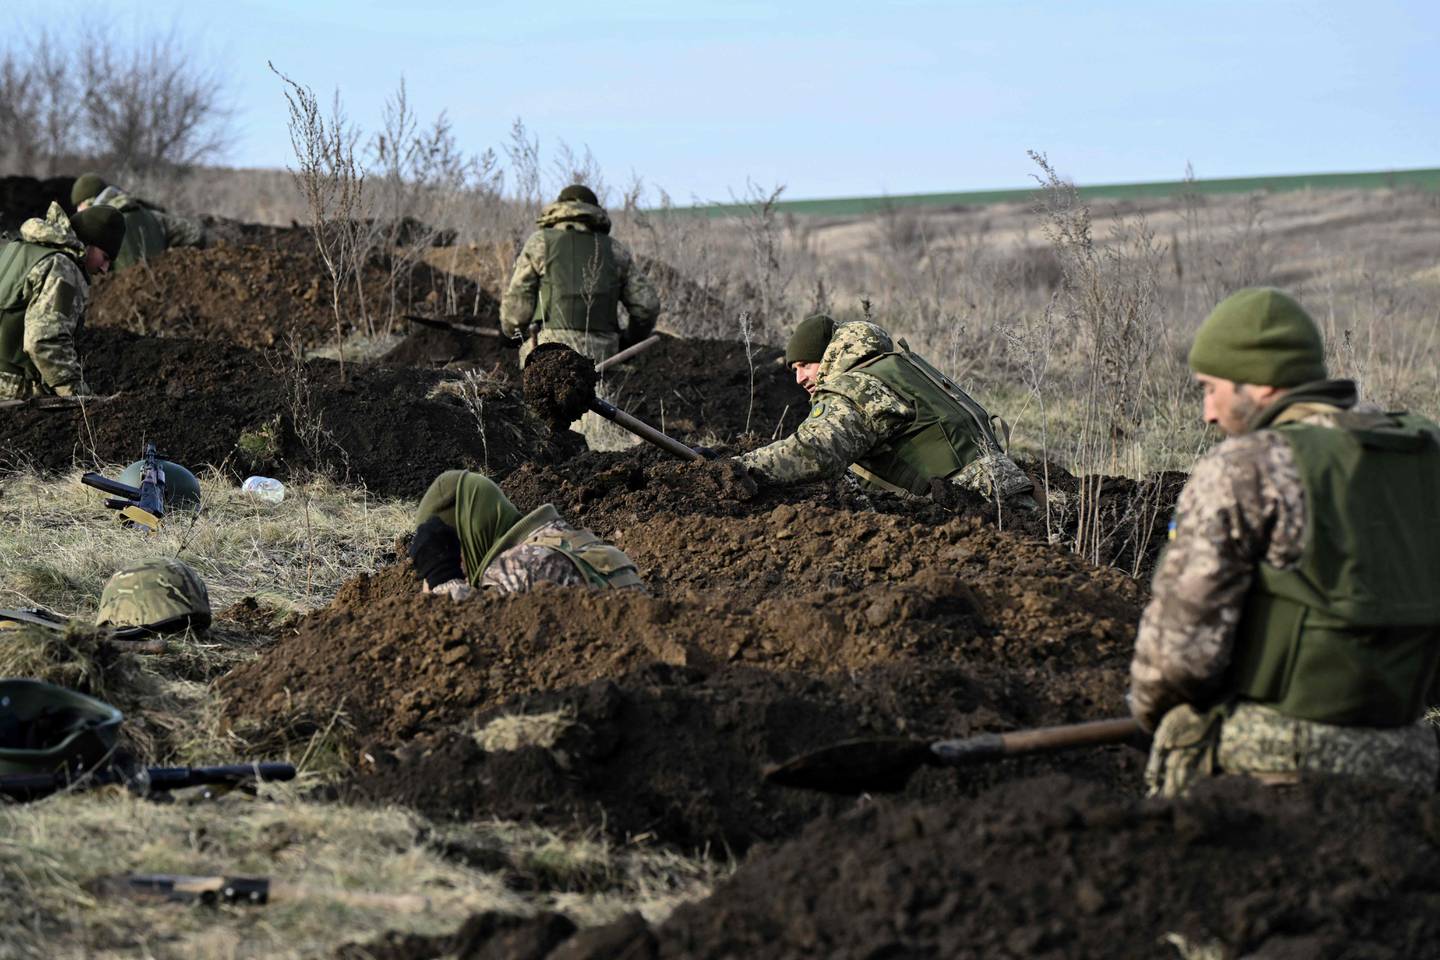 Ukrainian servicemen of the 42nd Mechanised Brigade dig trenches during a field military exercise in the Donetsk region on December 6, 2023, amid the Russian invasion of Ukraine. (Photo by Genya SAVILOV / AFP)